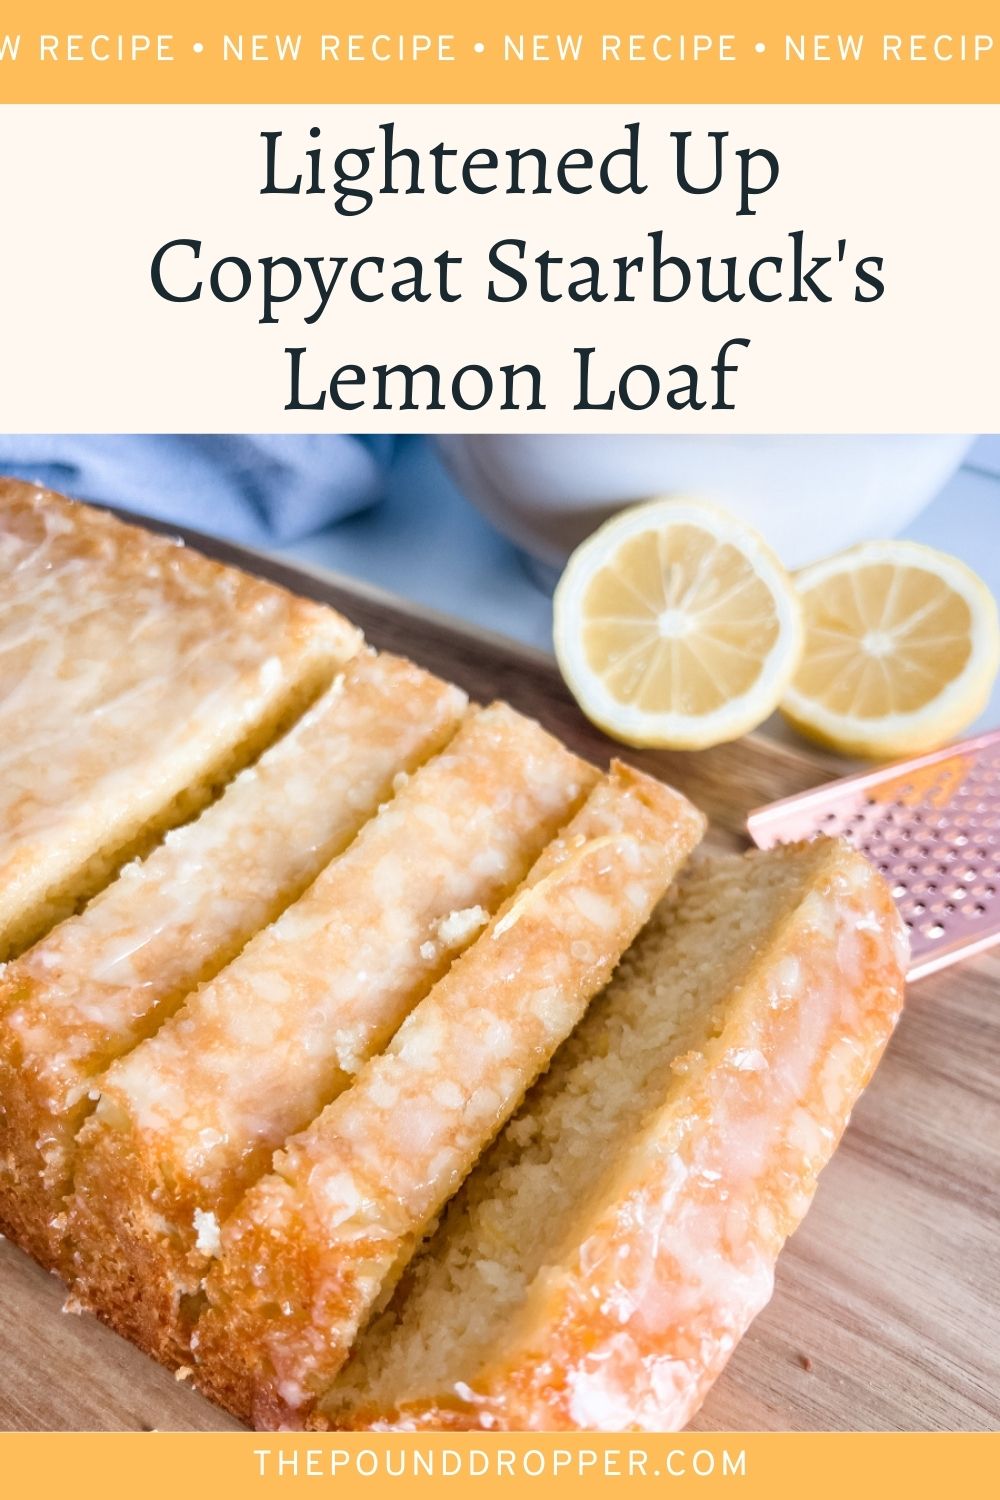 This amazing Lightened Up Copycat Starbucks Lemon Loaf is the absolute best! It's light, super moist, and bursting with lemon flavor. If you're a huge of the Starbucks lemon loaf, then you will love this lemon loaf! via @pounddropper